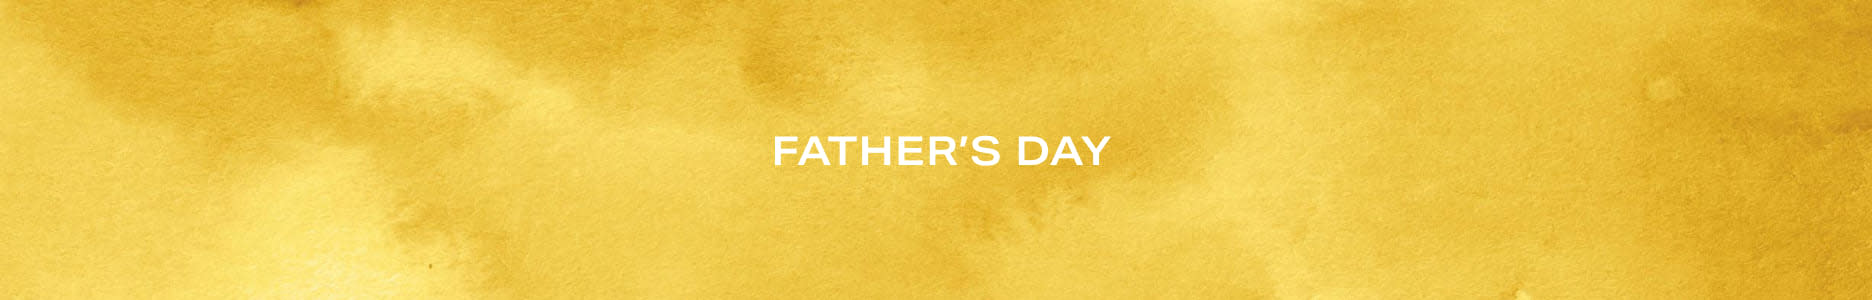 Father's day Editorial - Banner 1 - Full width